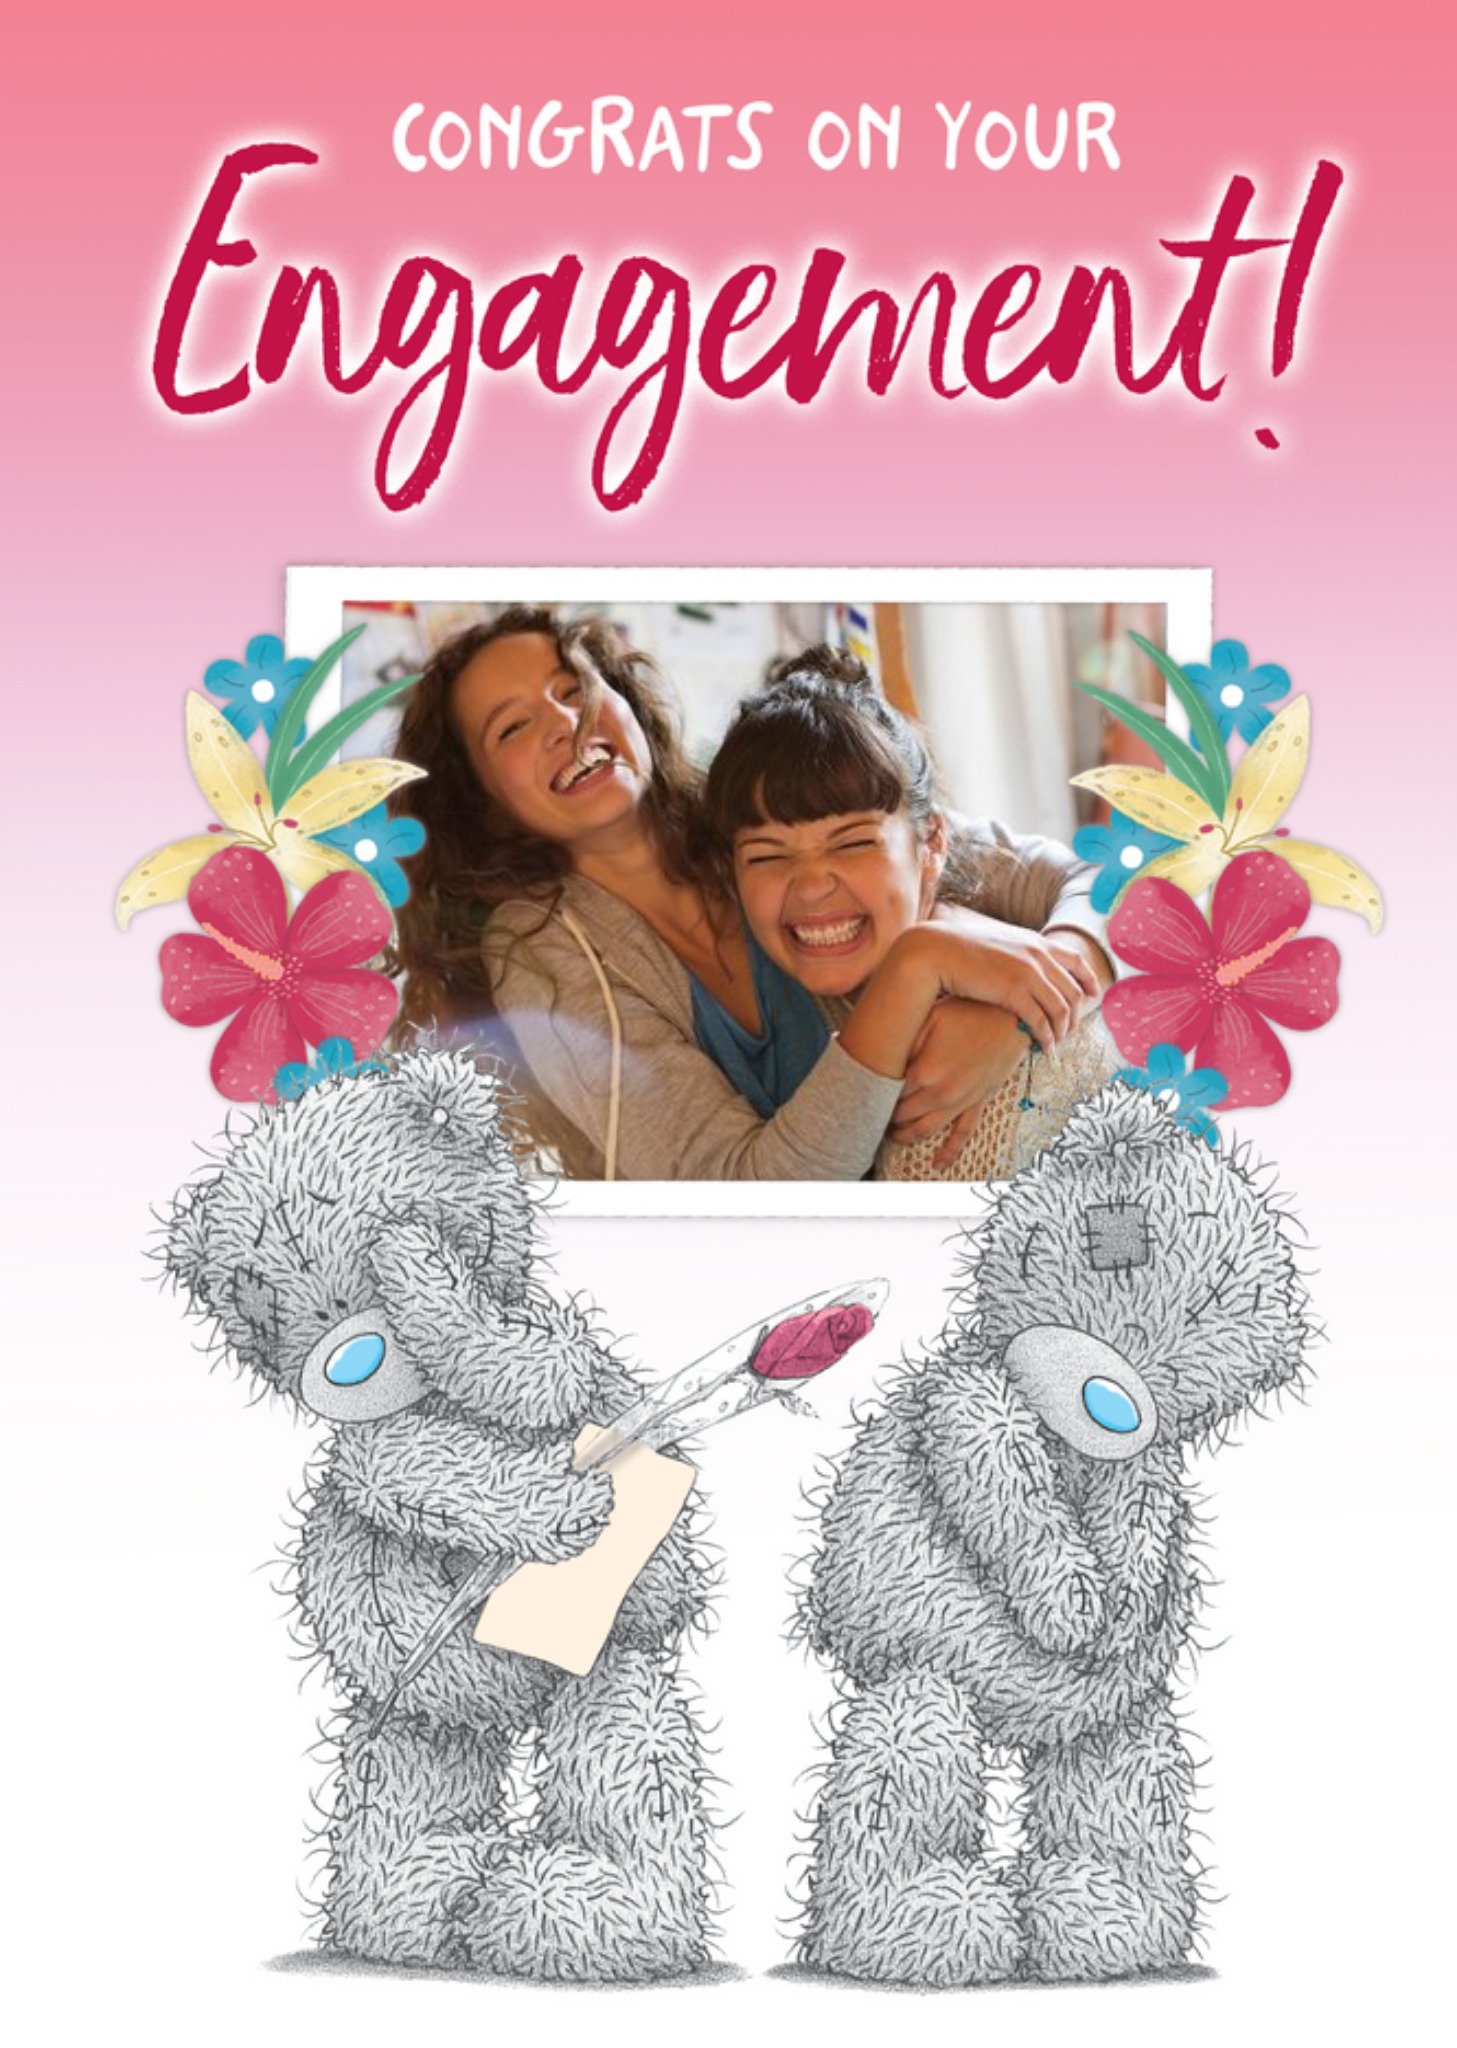 Me To You Tatty Teddy Cute Photo Upload Floral Engagement Congrats Card Ecard